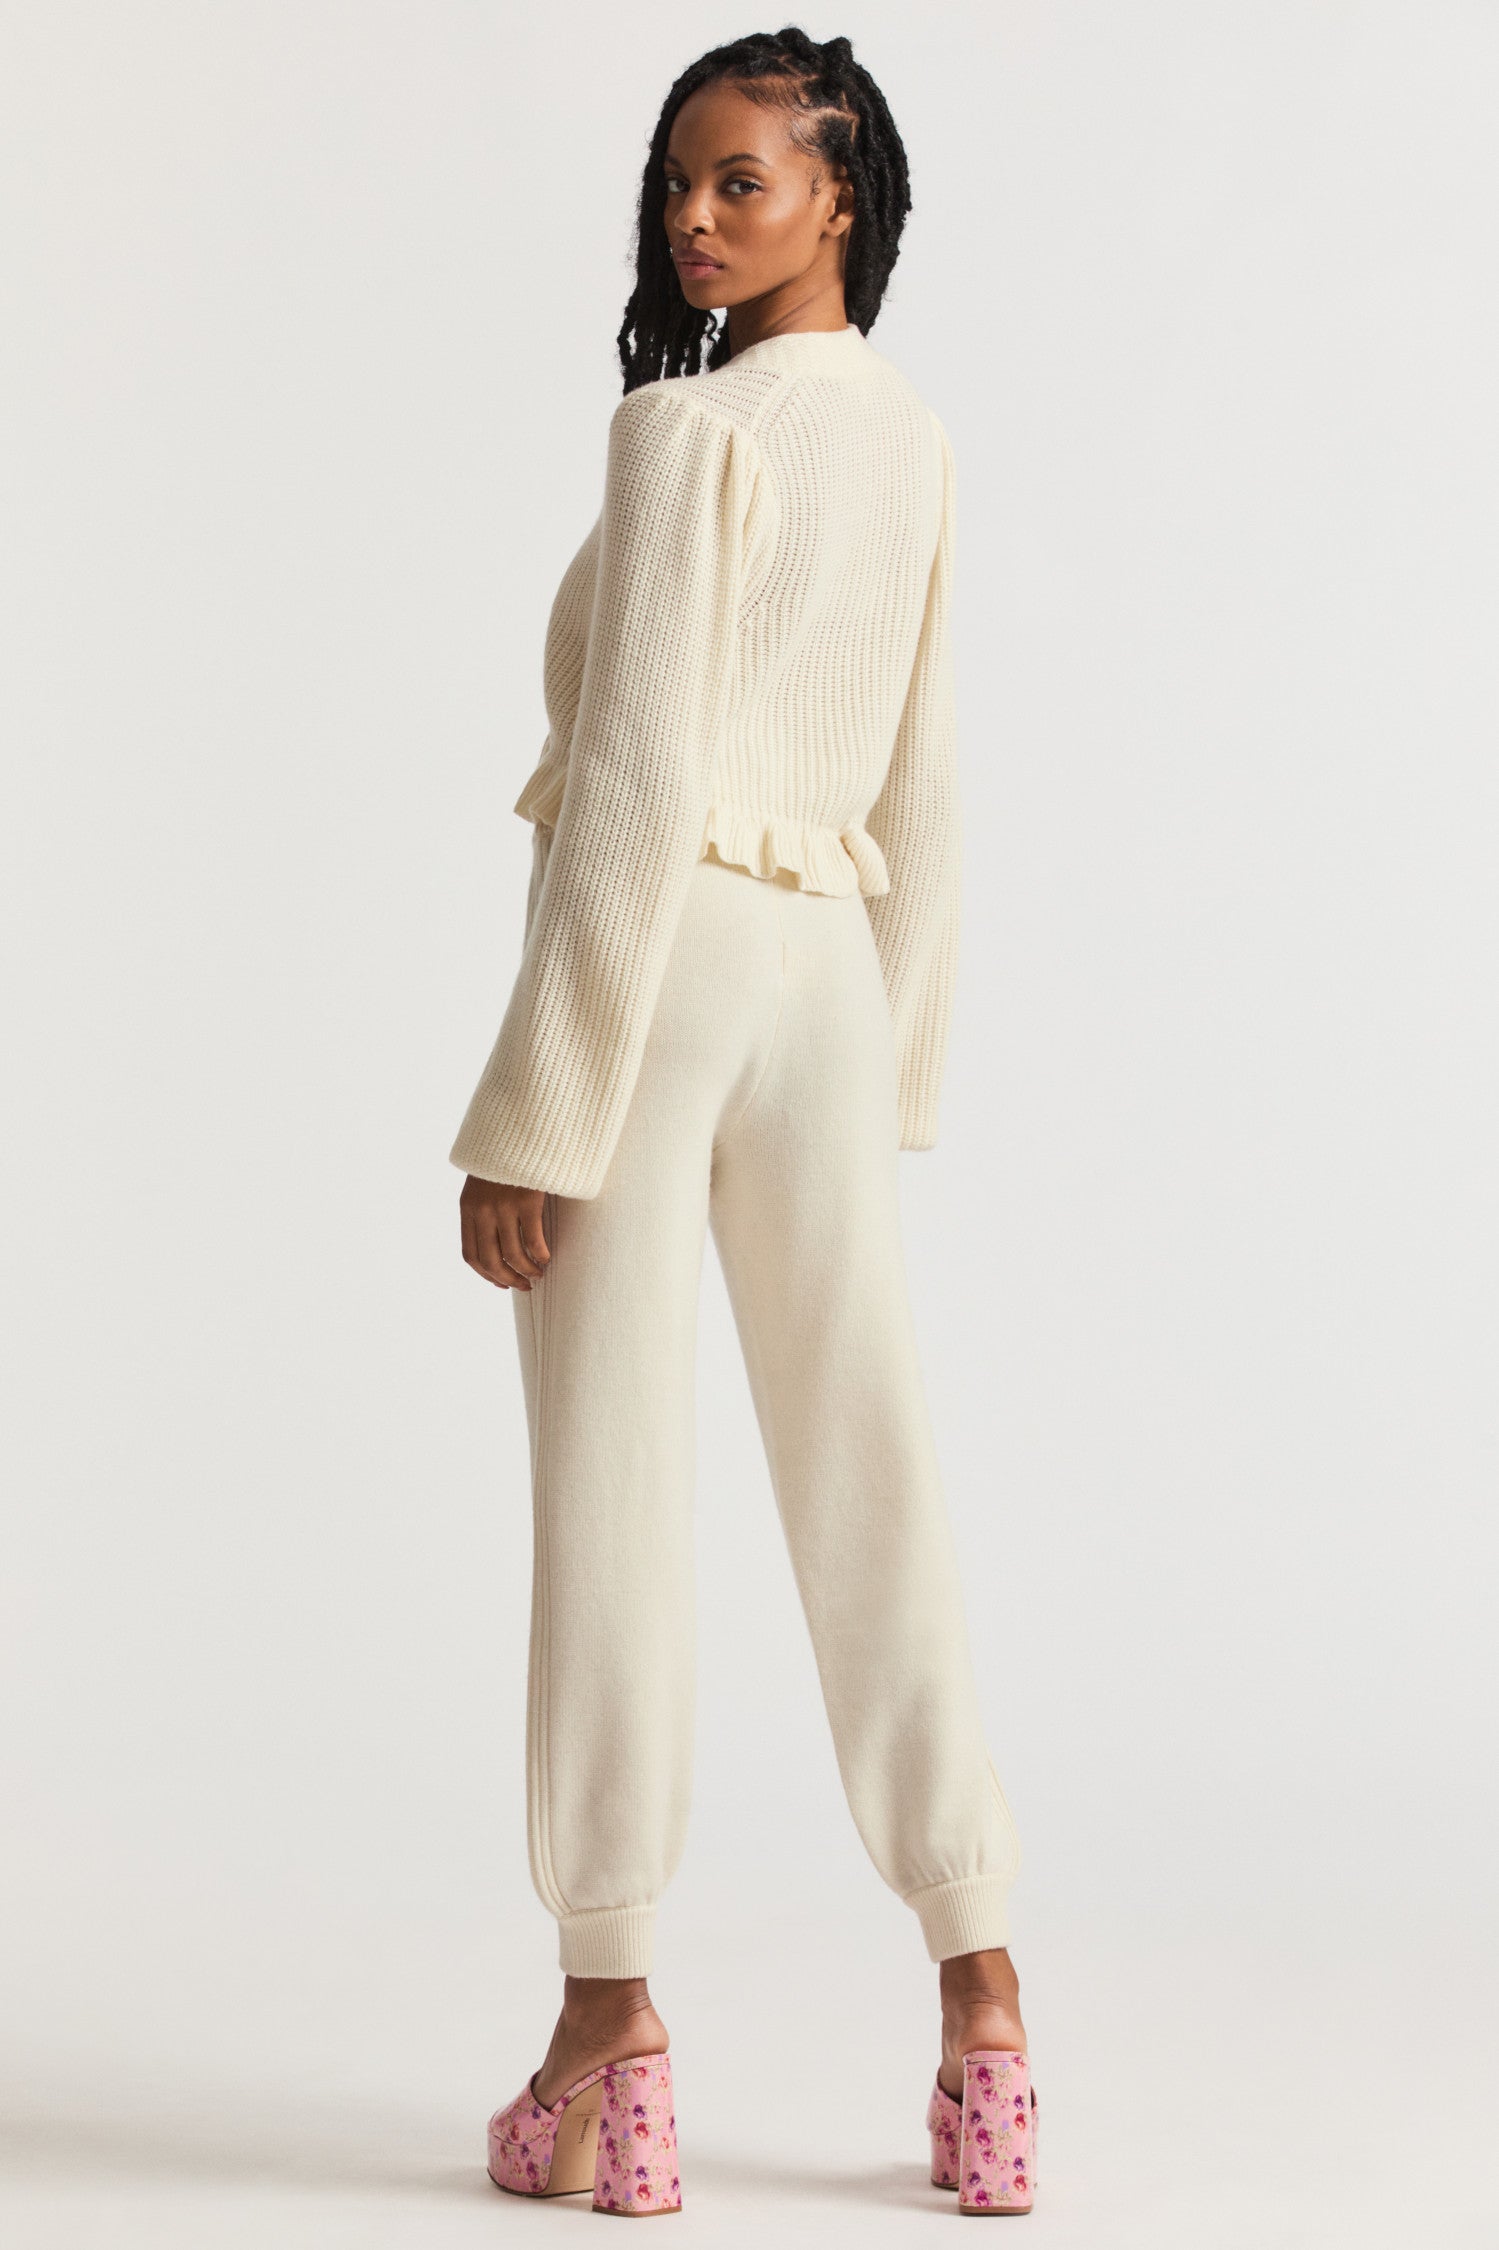 Cream pants made of cashmere fabric feature tuxedo stripe stitching along the sides and a drawstring waistband for easy wear.